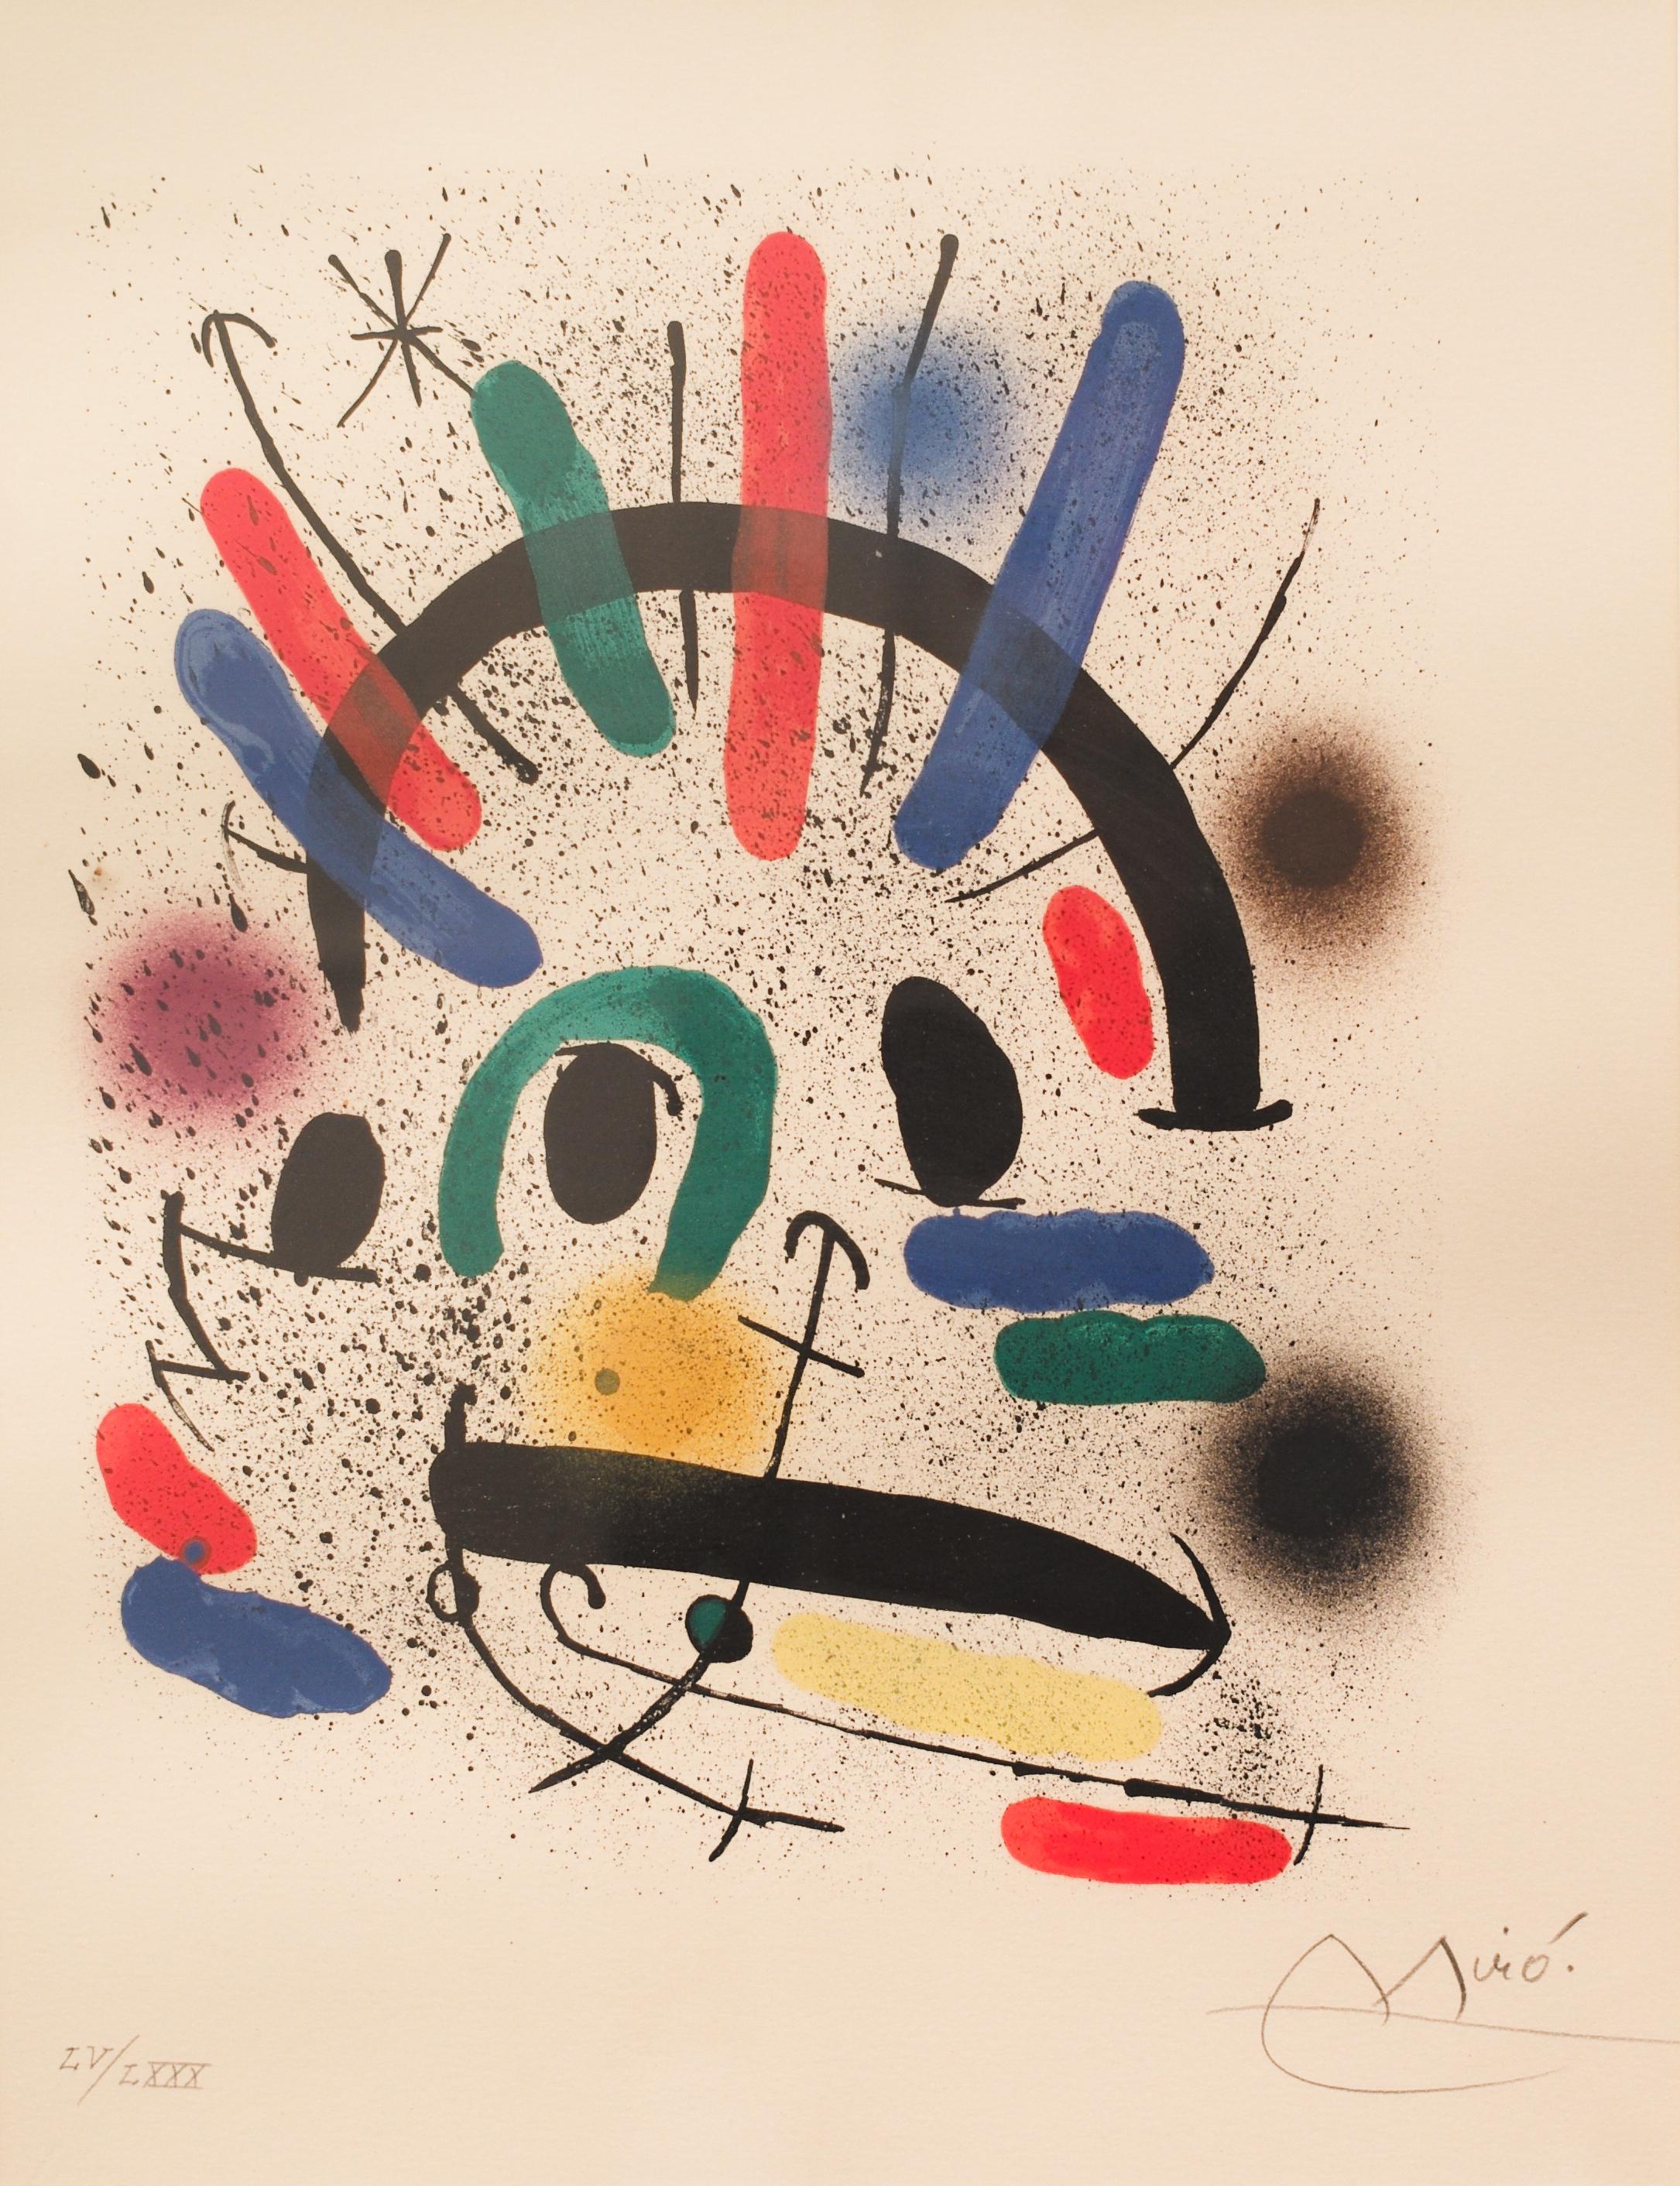 Original Signed Lithograph by Joan Miró, M.858